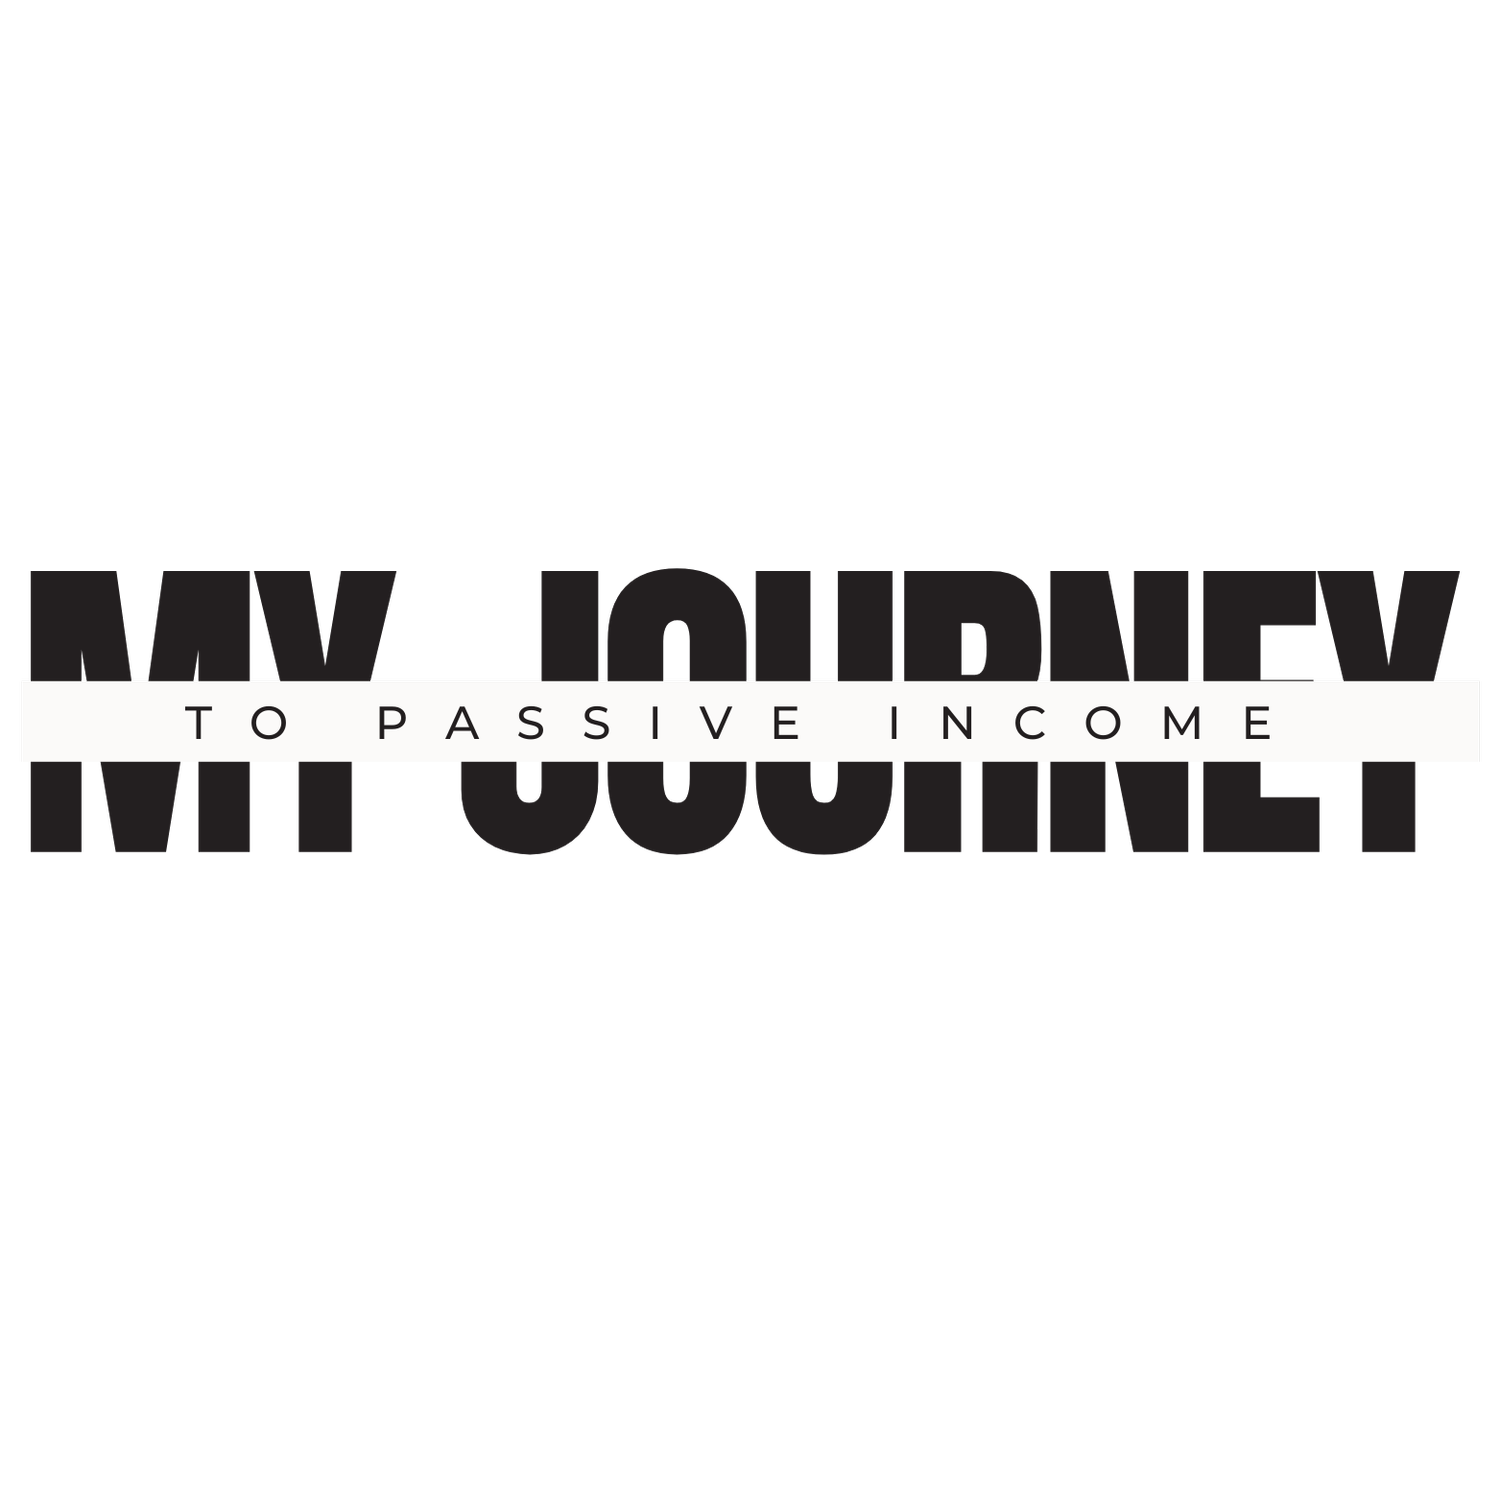 My Journey to Passive Income